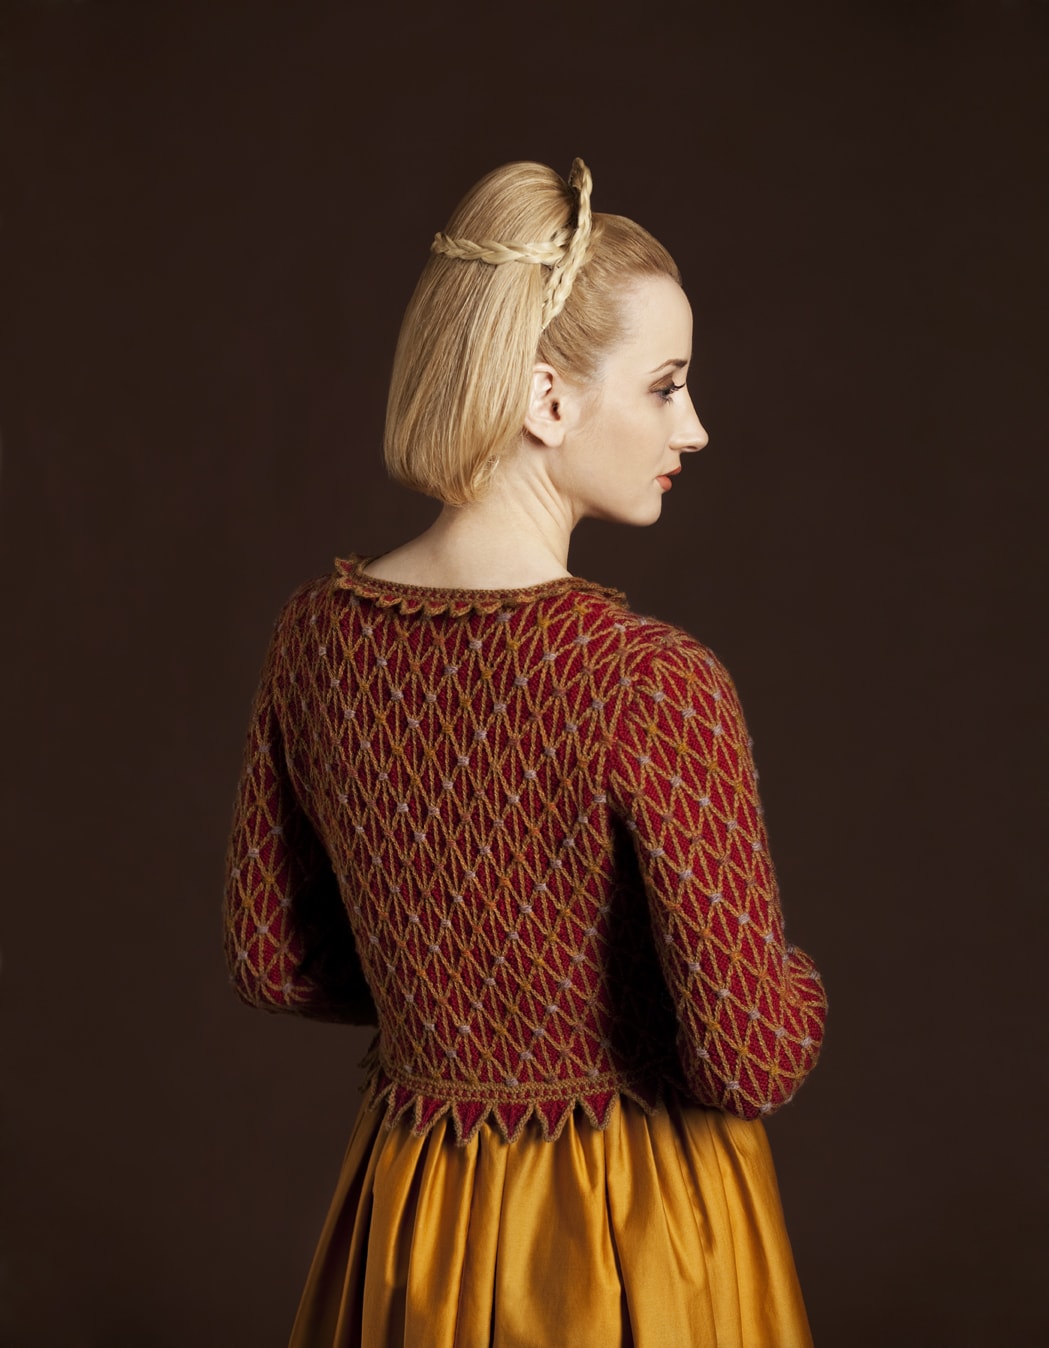 Jane Seymour hand knitwear design by Alice Starmore from the book Tudor Roses